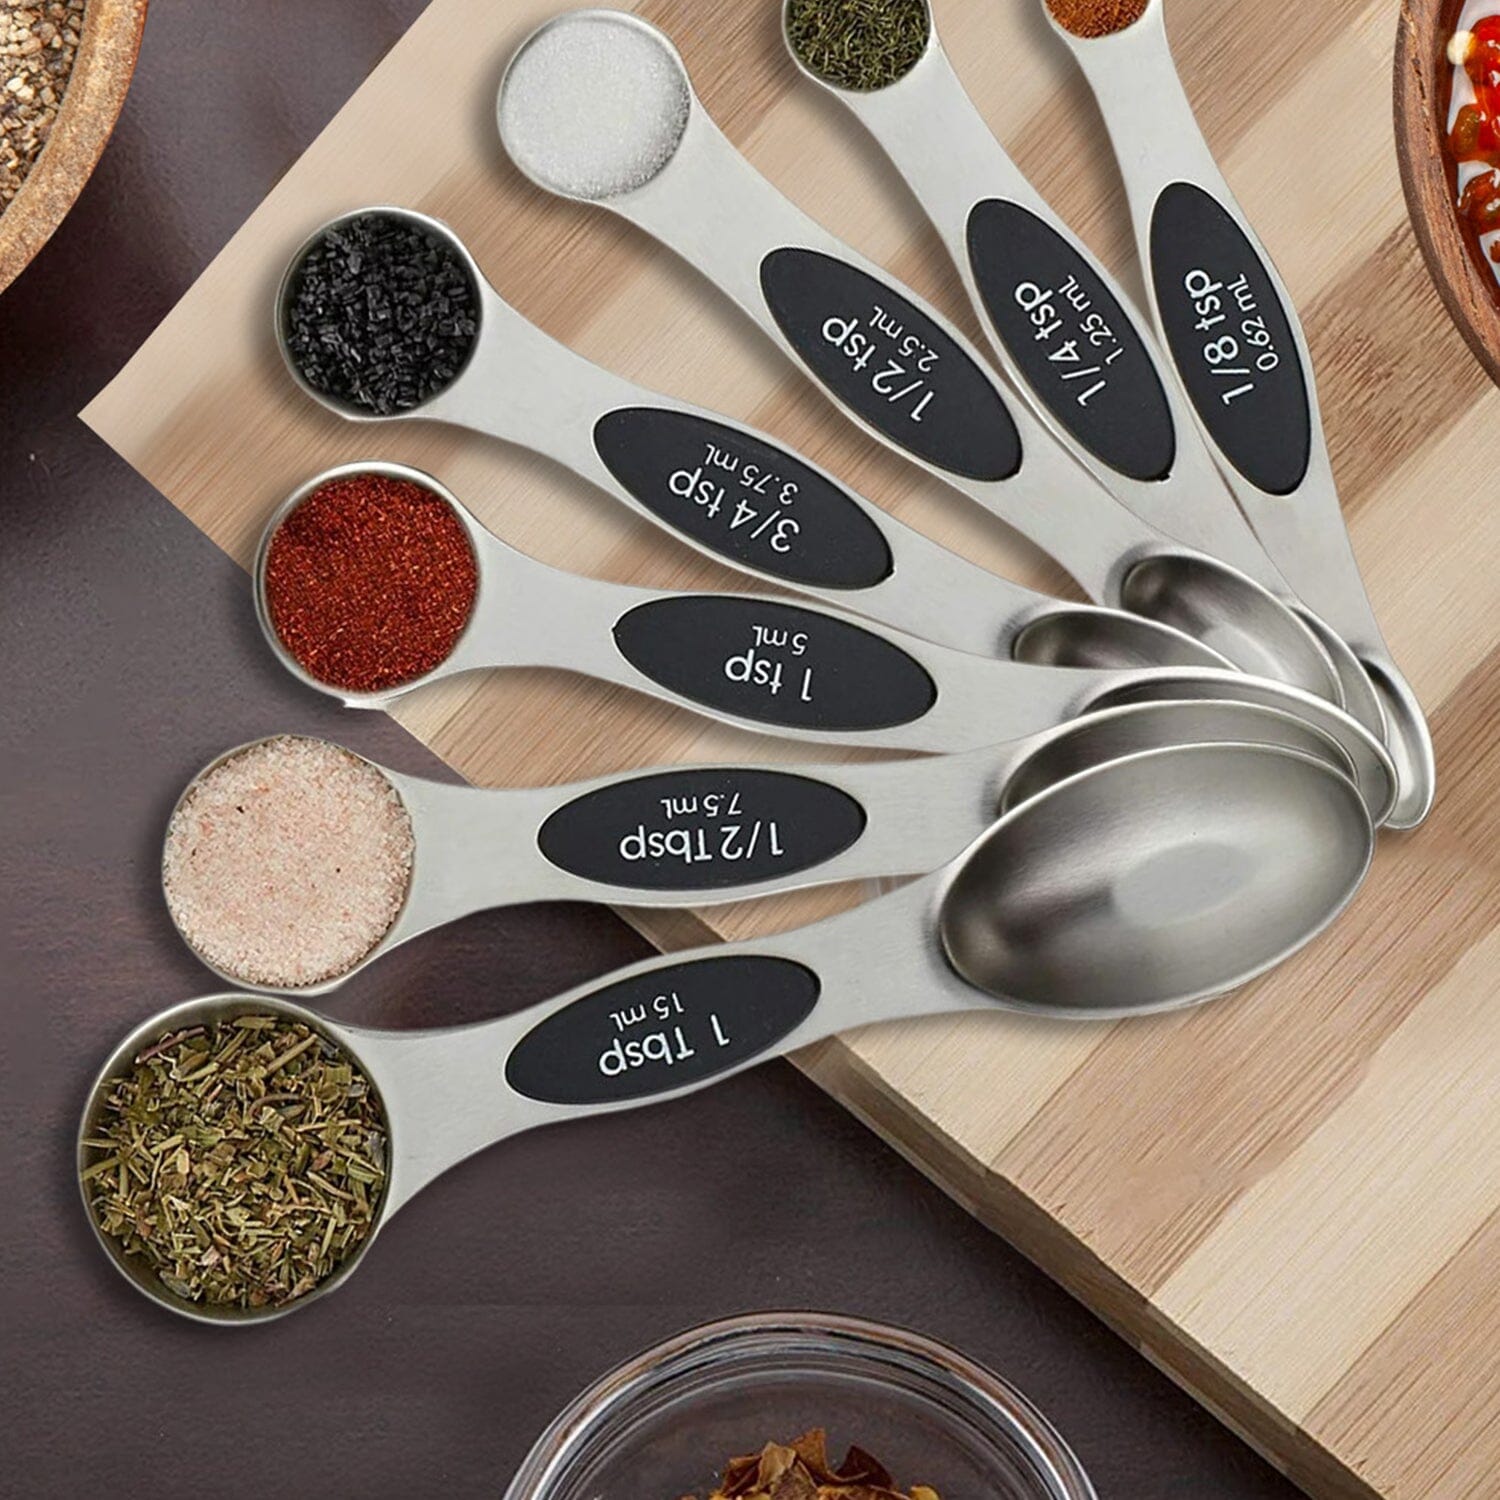 Stainless Steel Magnetic Measuring Spoons and Leveler - 8-Piece